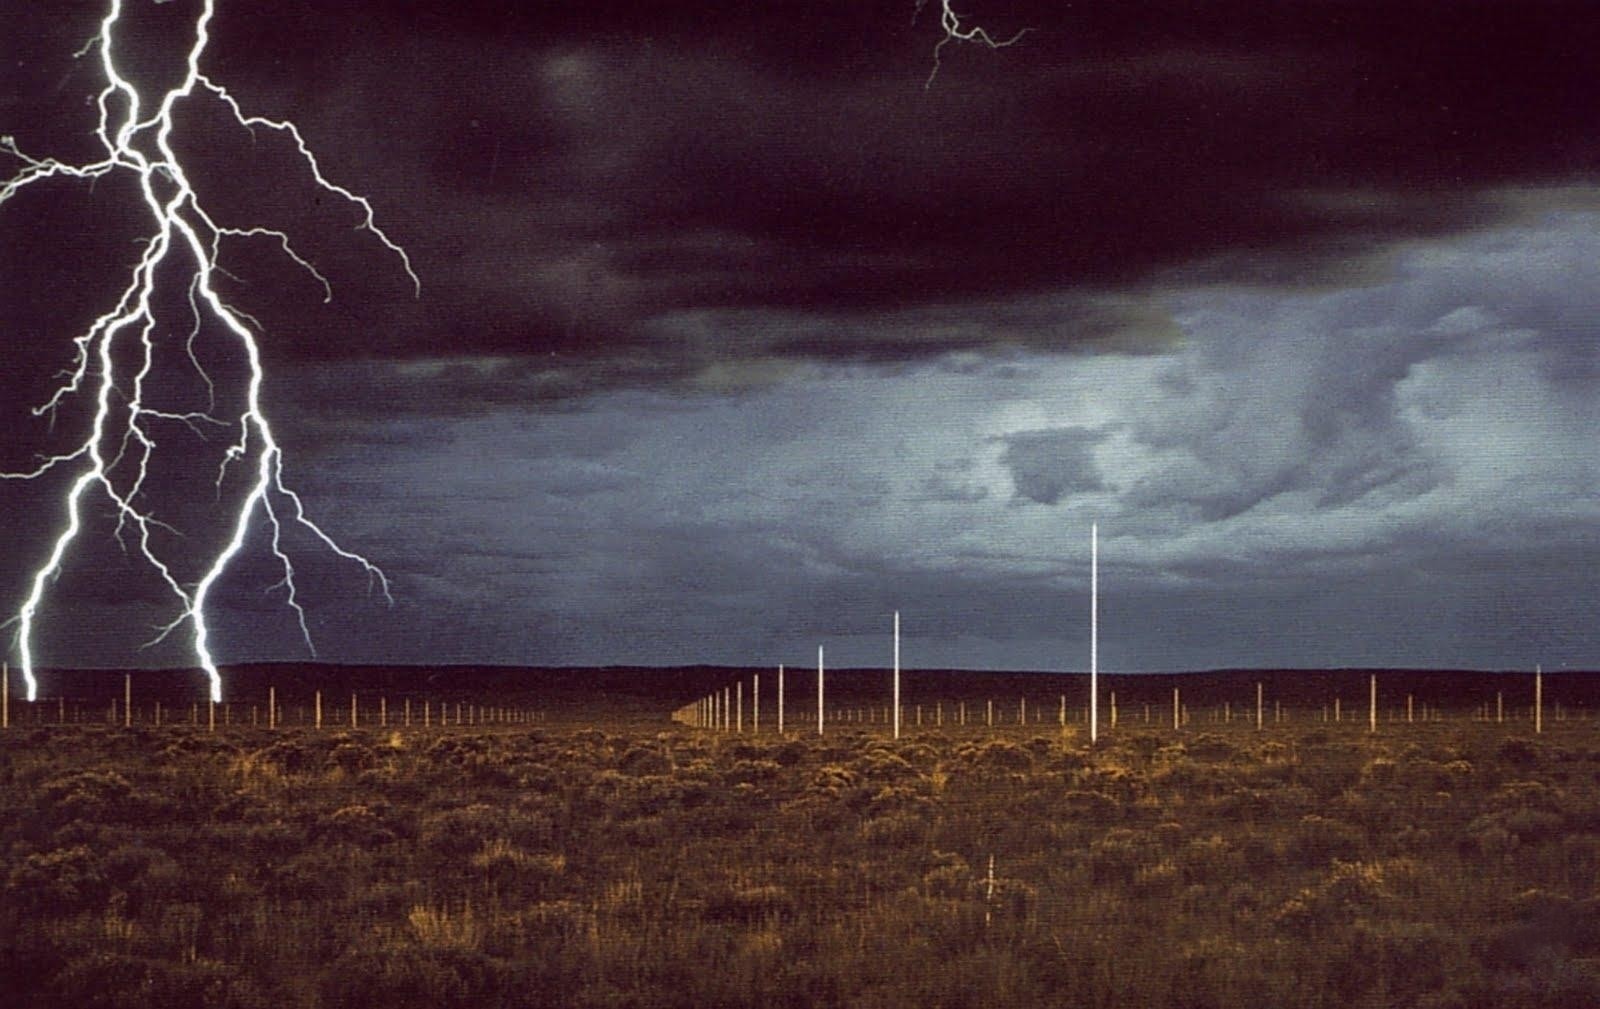 Walter De Maria. The Lightning Field. 1977. Installation. New Mexico, United States.